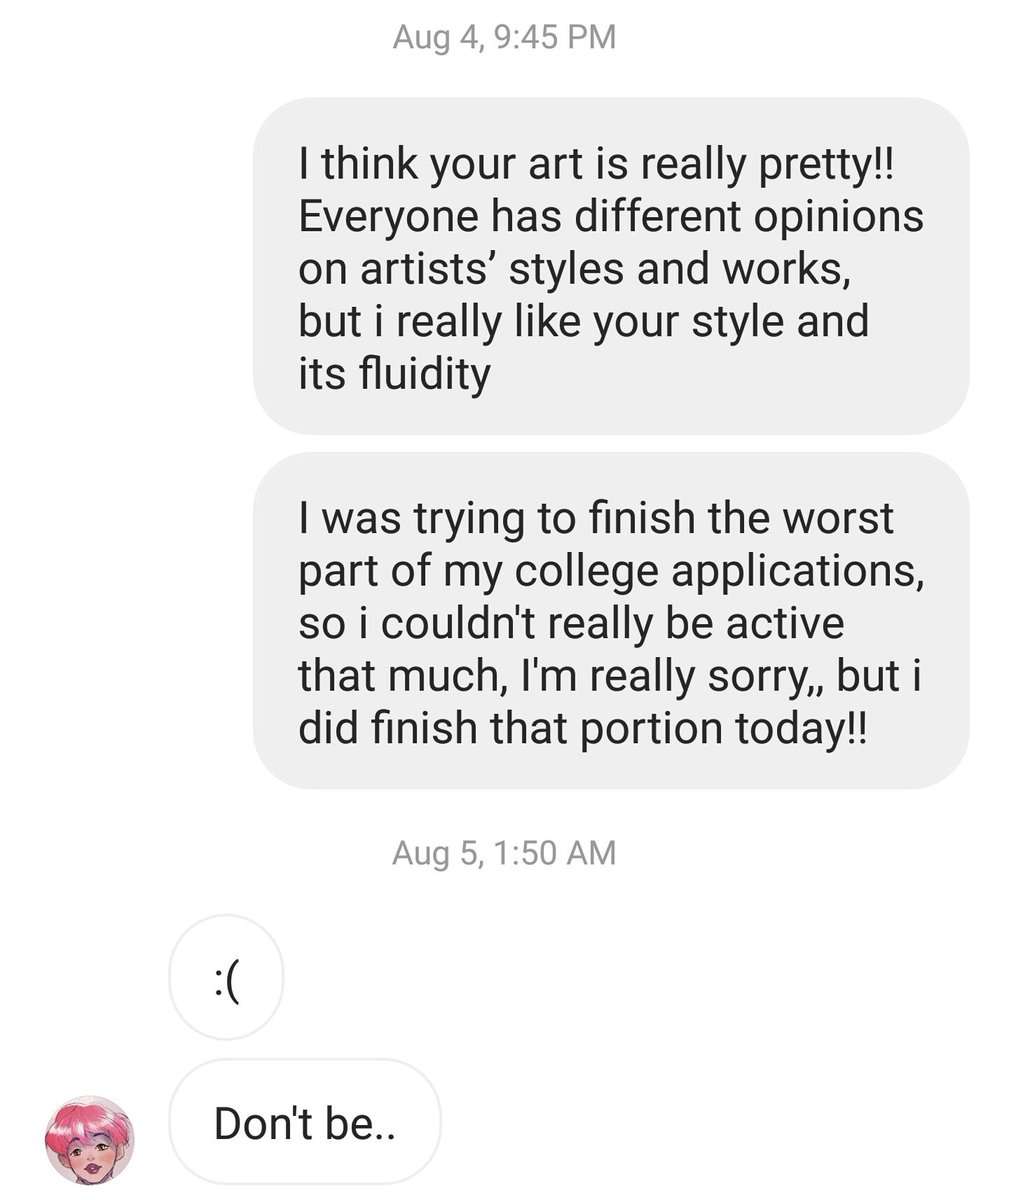 this happened just after. i had my notifs off bc i was dealing with college applications, but i felt bad that i didnt tell her i was busy beforehand